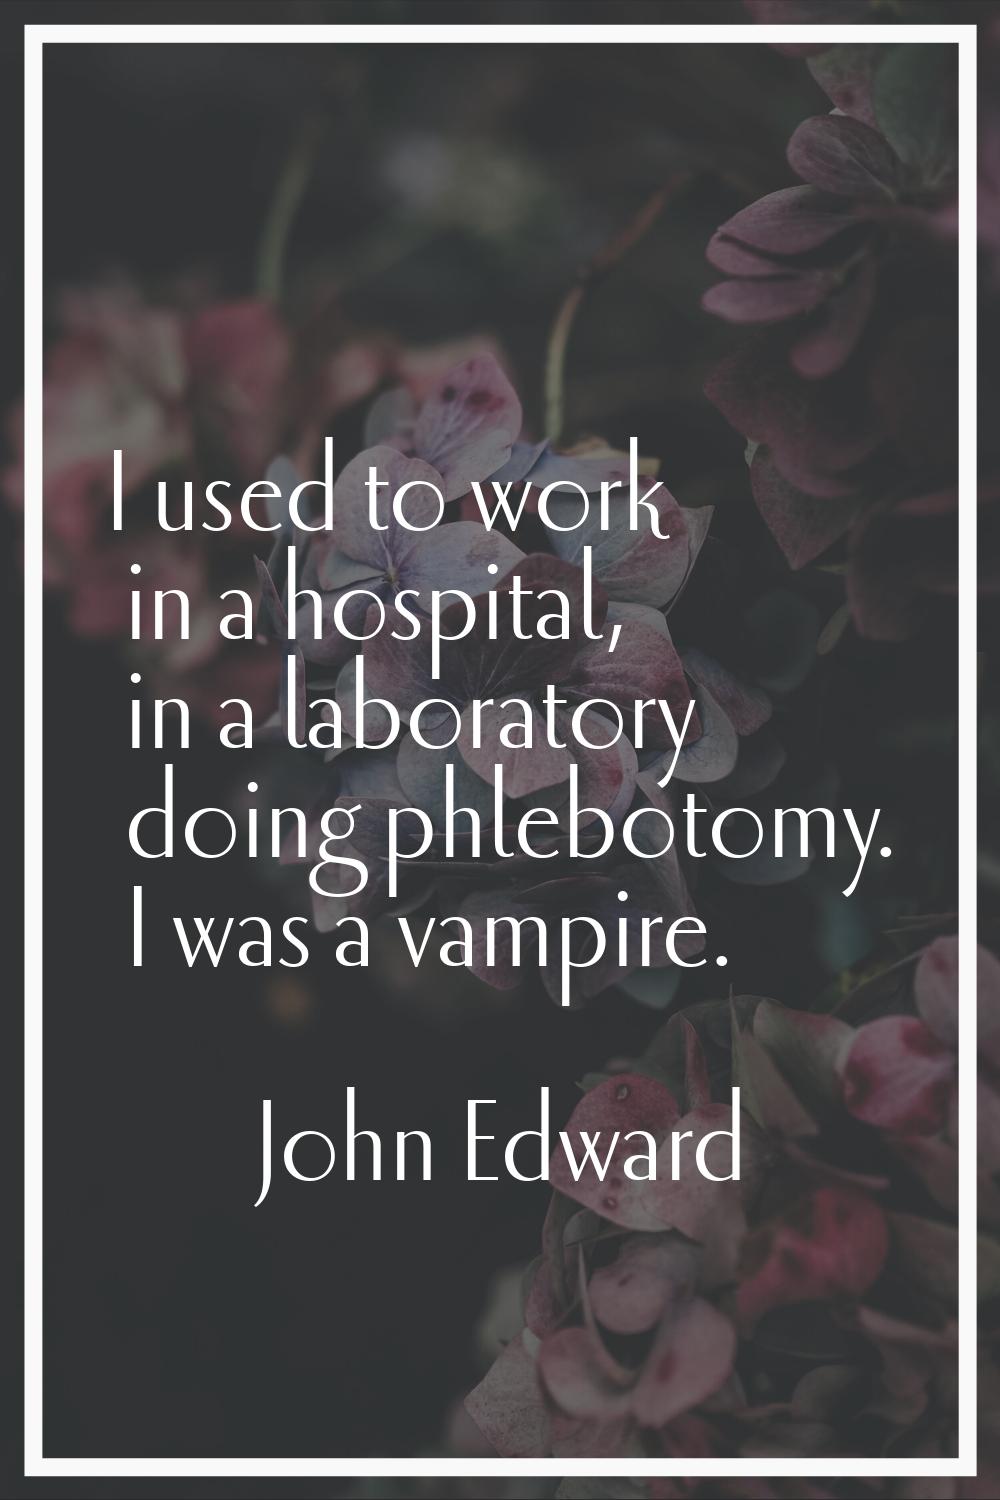 I used to work in a hospital, in a laboratory doing phlebotomy. I was a vampire.